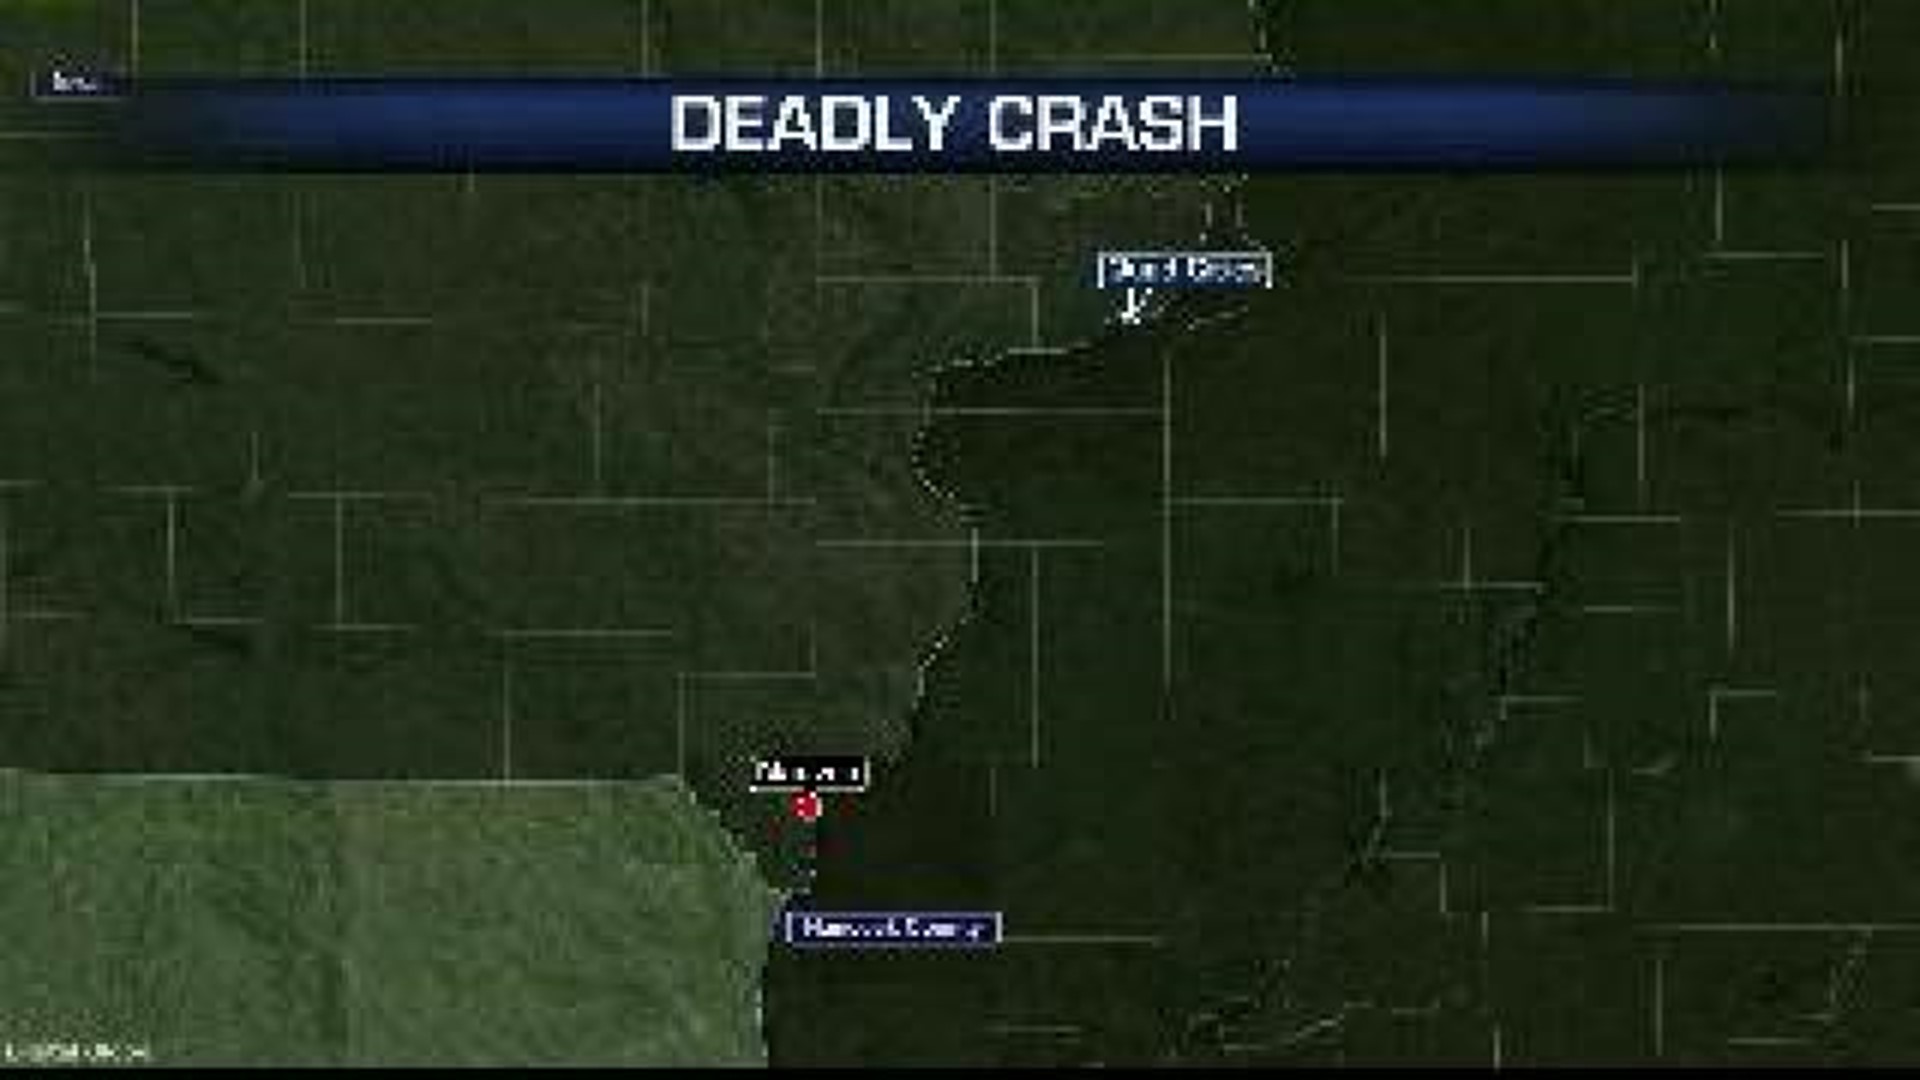 One killed in crash on Illinois Route 96